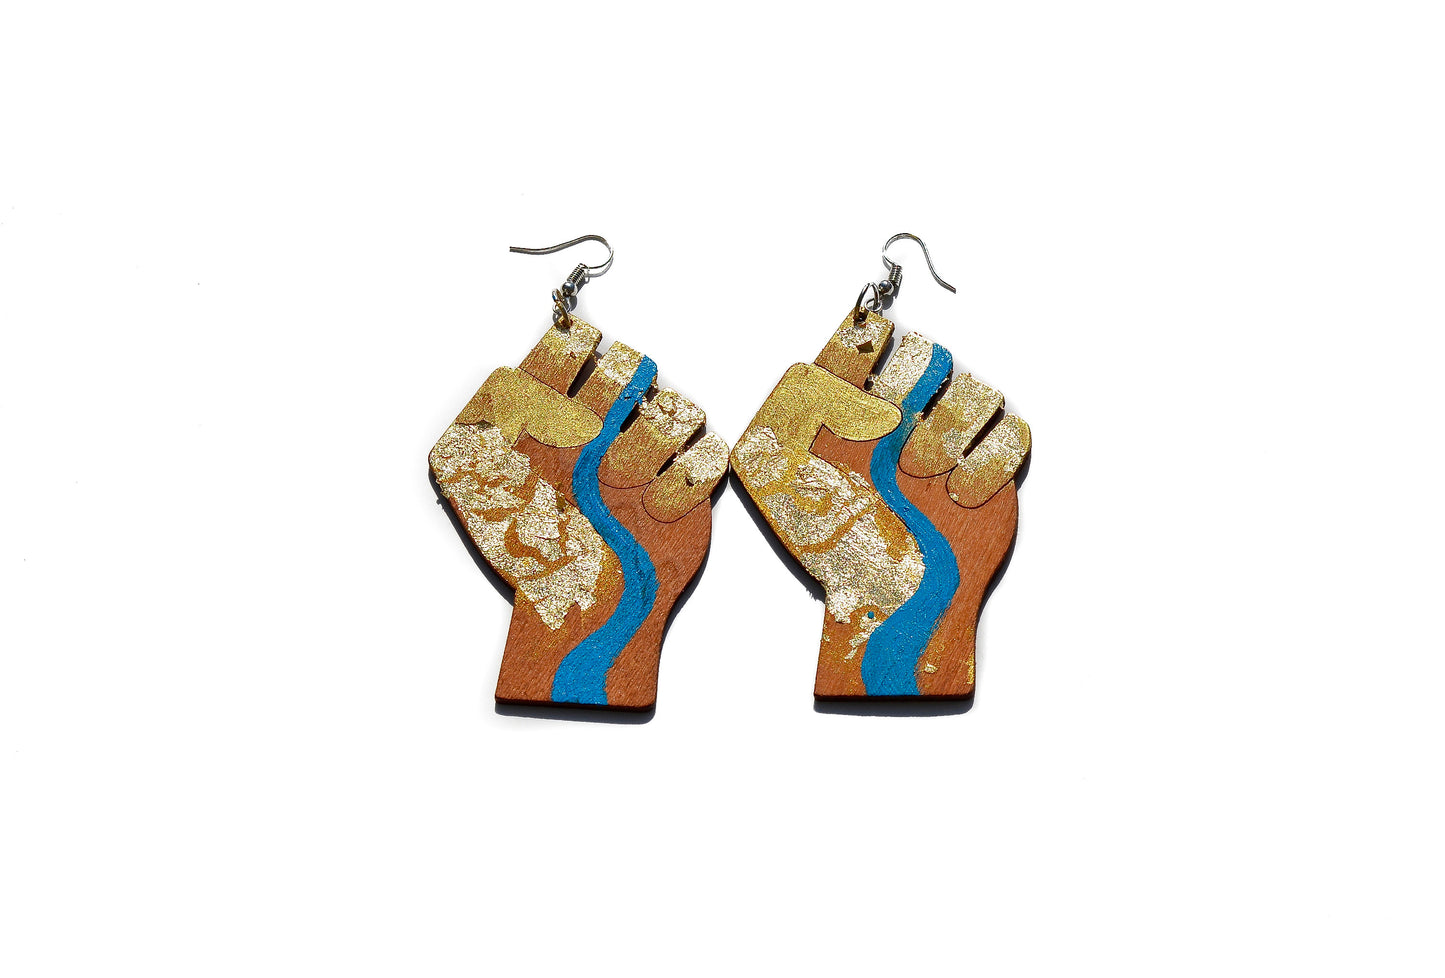 Earth Power Fist Resilience Flower Power Gold Leaf River Laser Cut Earrings (Real Gold Leaf)